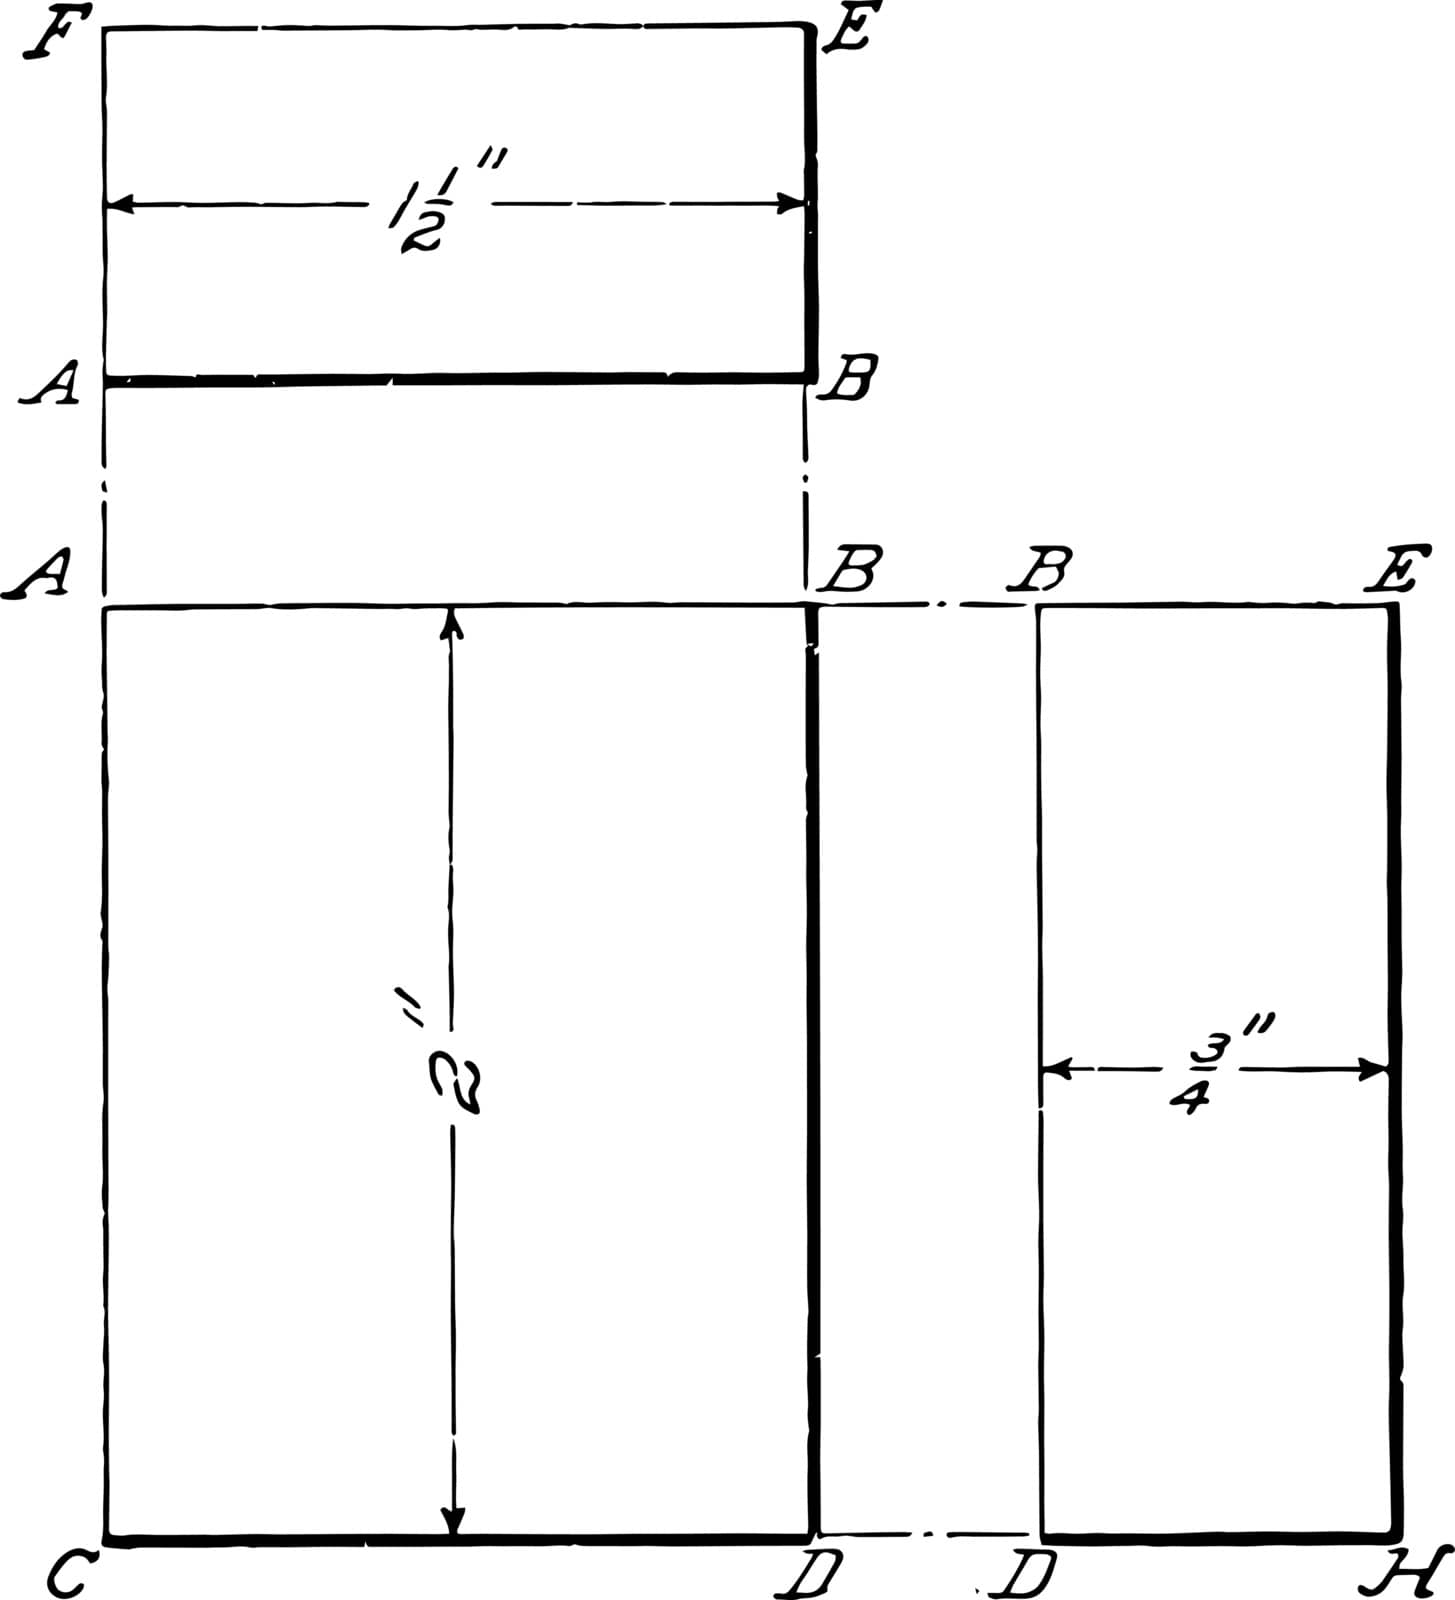 The image shows the projection of a rectangular prism that is represented as standing on one of its small ends, with the wide side facing the observer, vintage line drawing or engraving illustration.